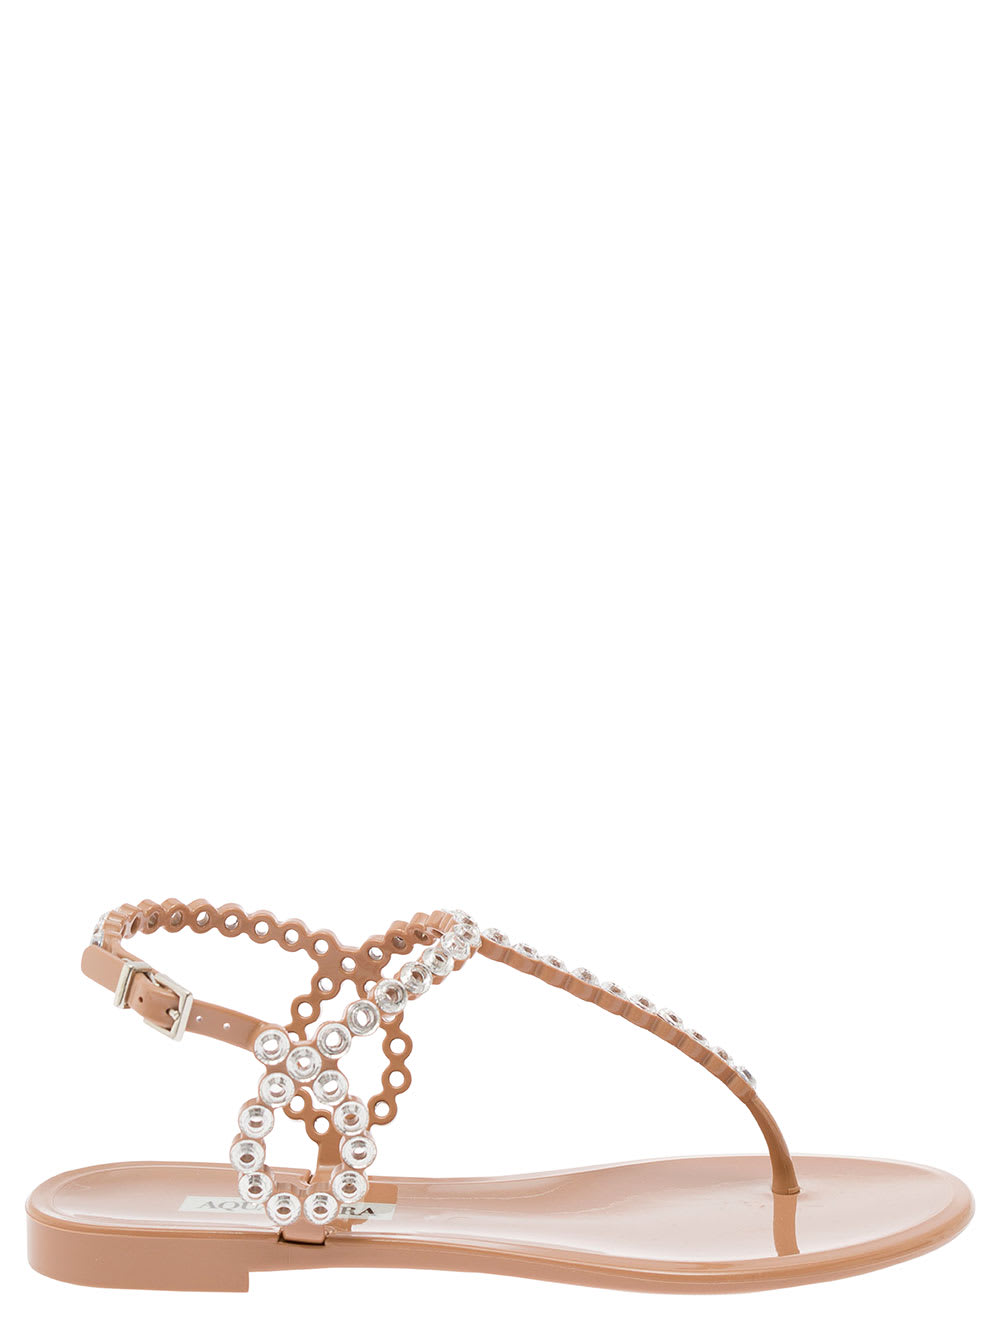 Almost Bare Crystal Jelly Sandal Flat